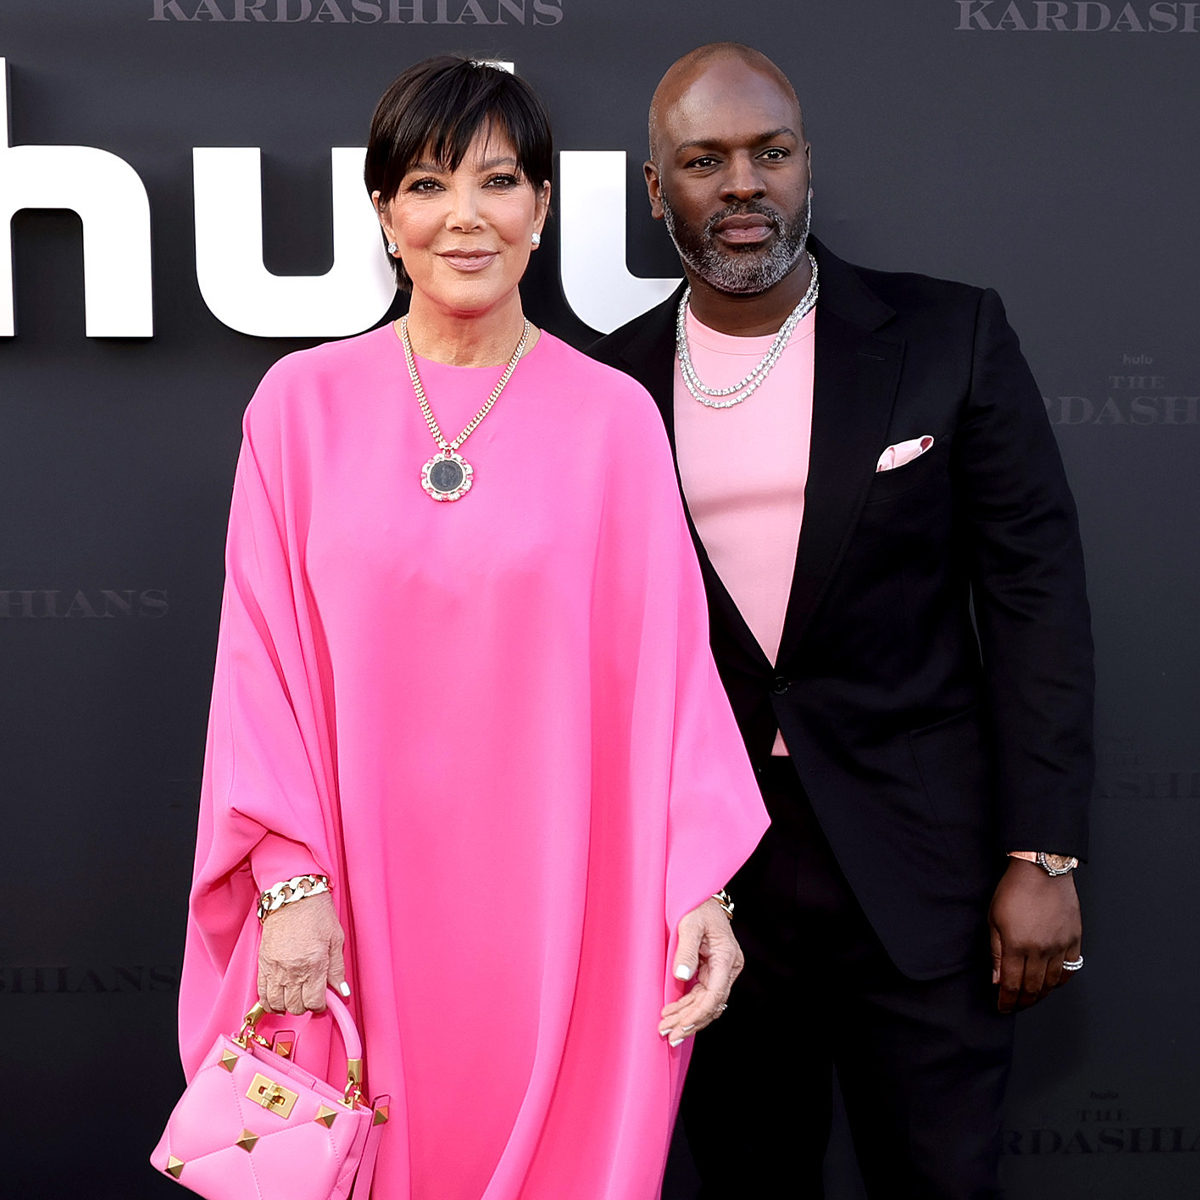 Kris Jenner Vacations With BF Corey Gamble In St. Barts: Photos